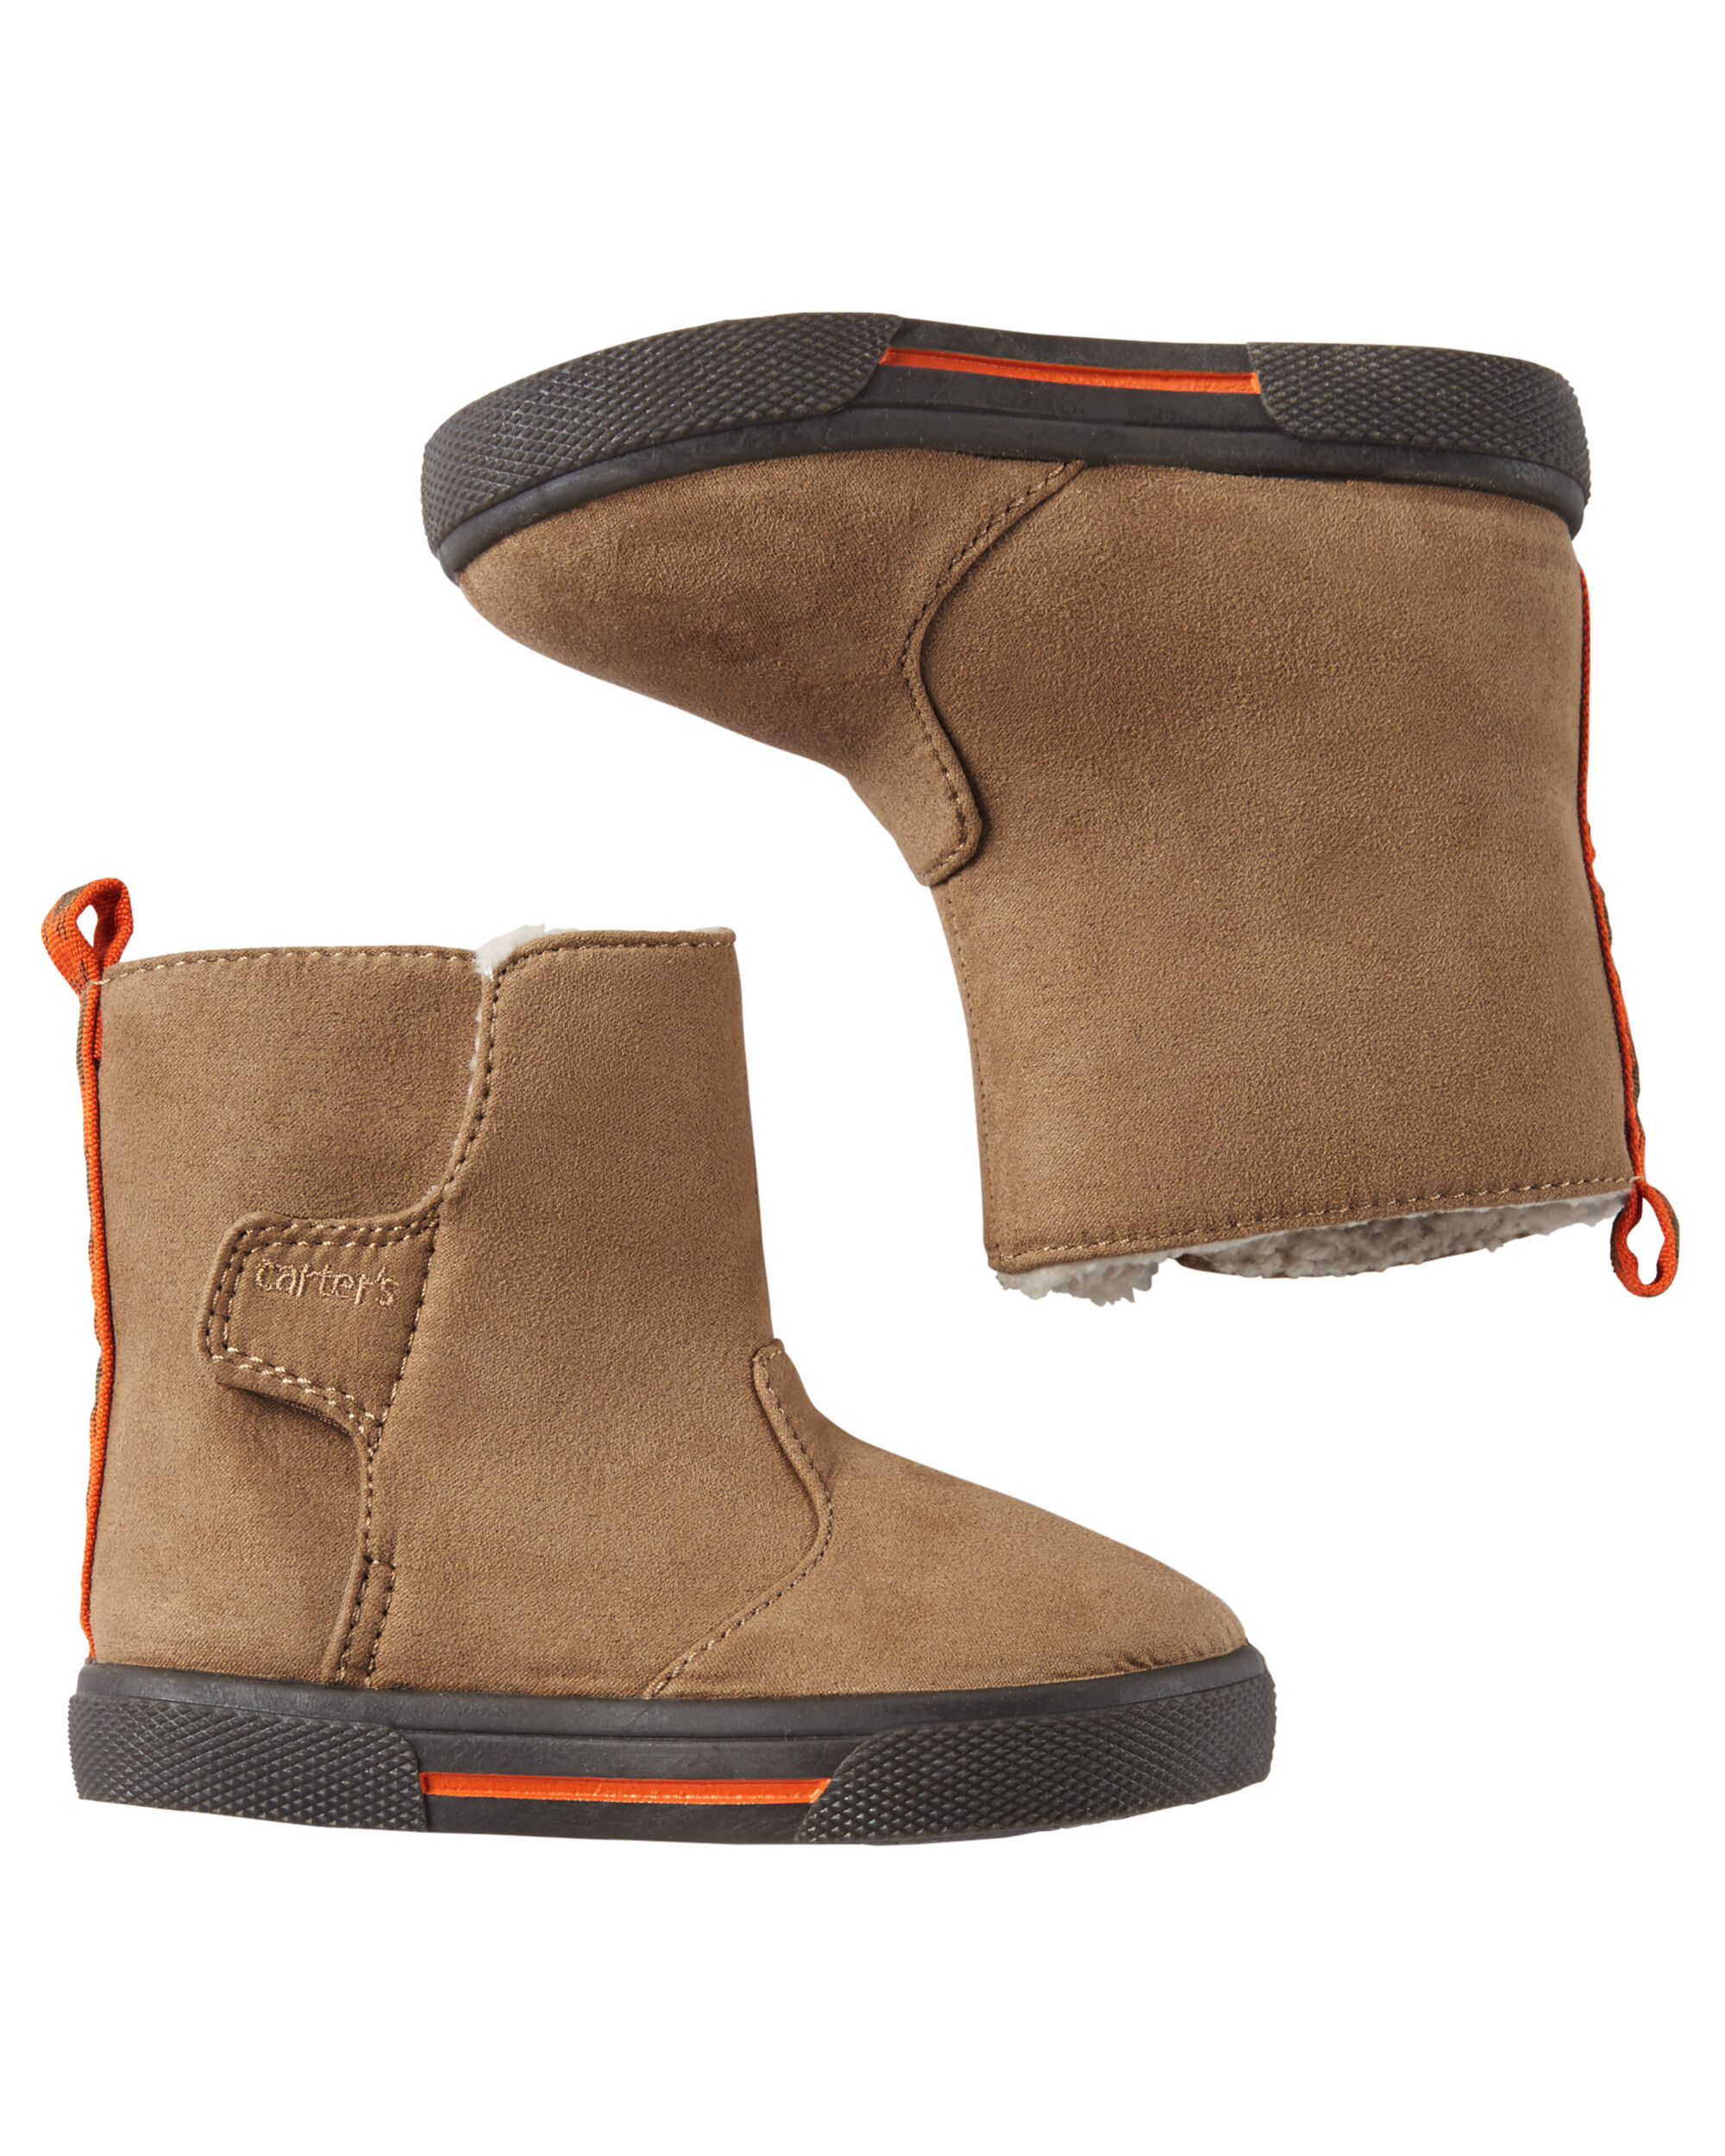 Carter's Sherpa-Lined Boots | carters.com